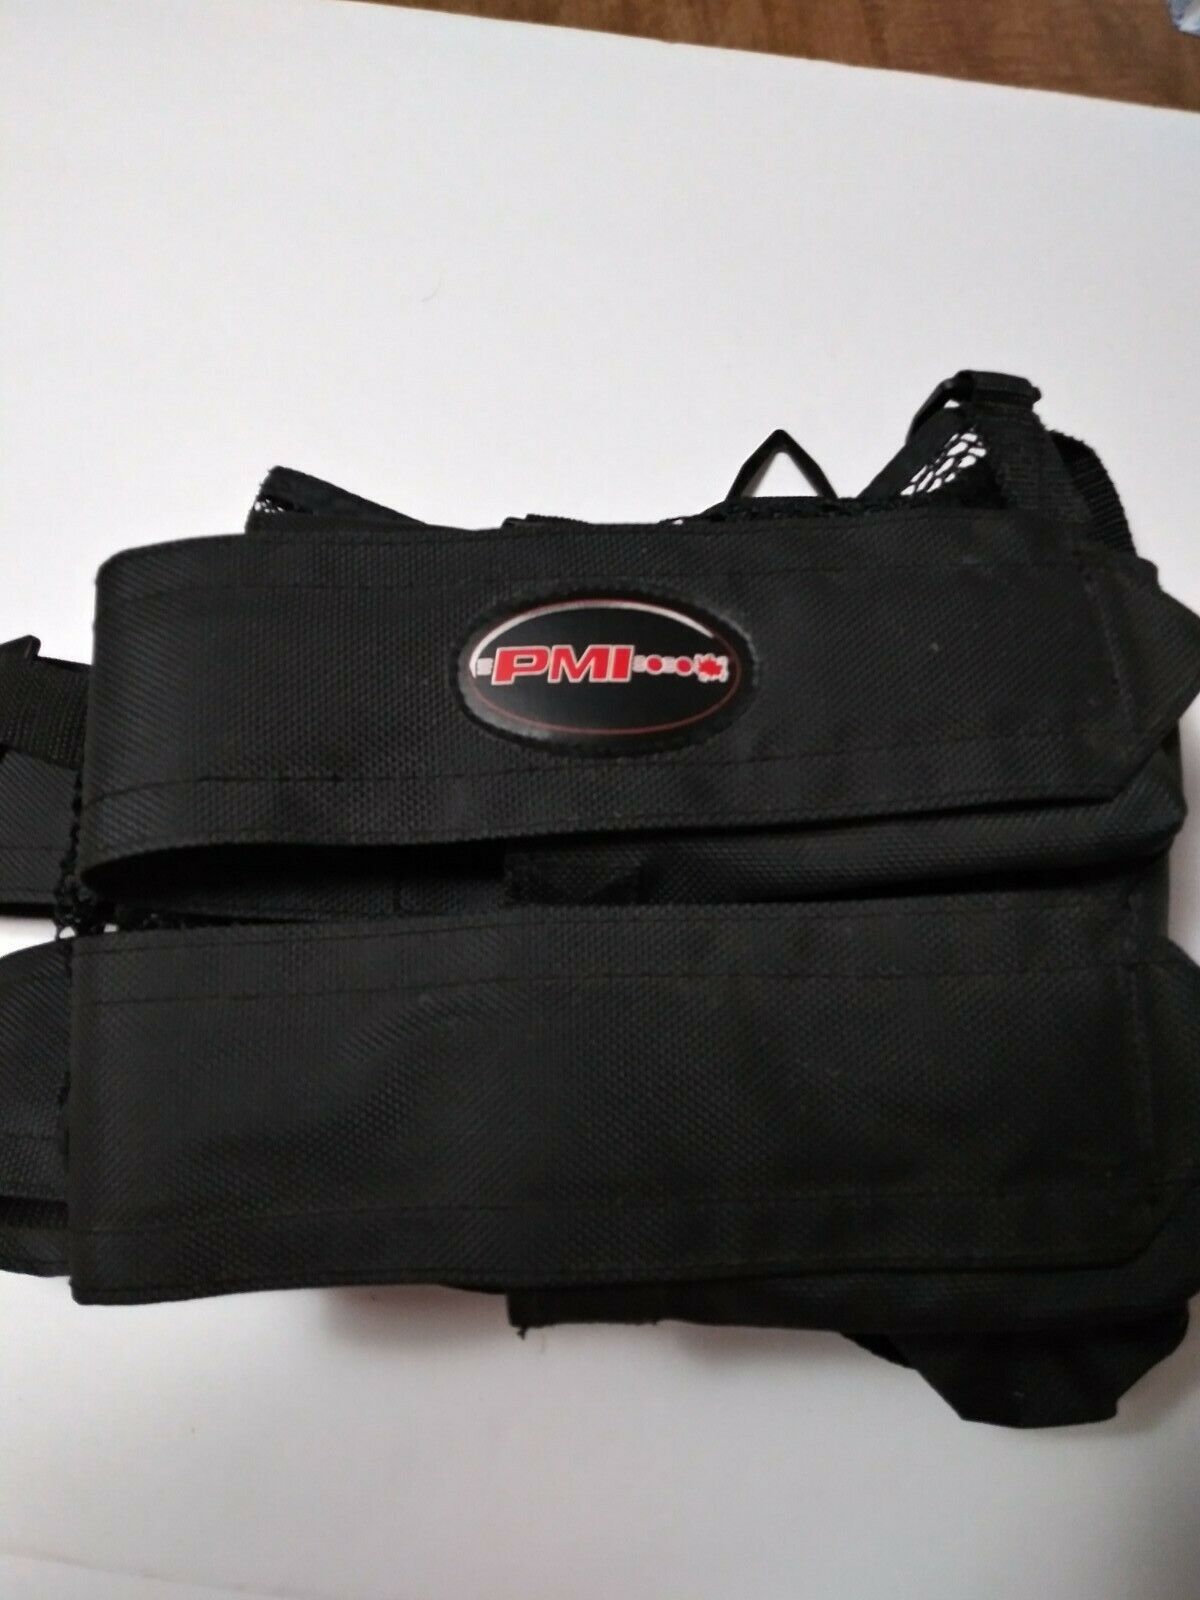 Pmi  Paintball Pod Belt Harness ( Harness Only) No Pods